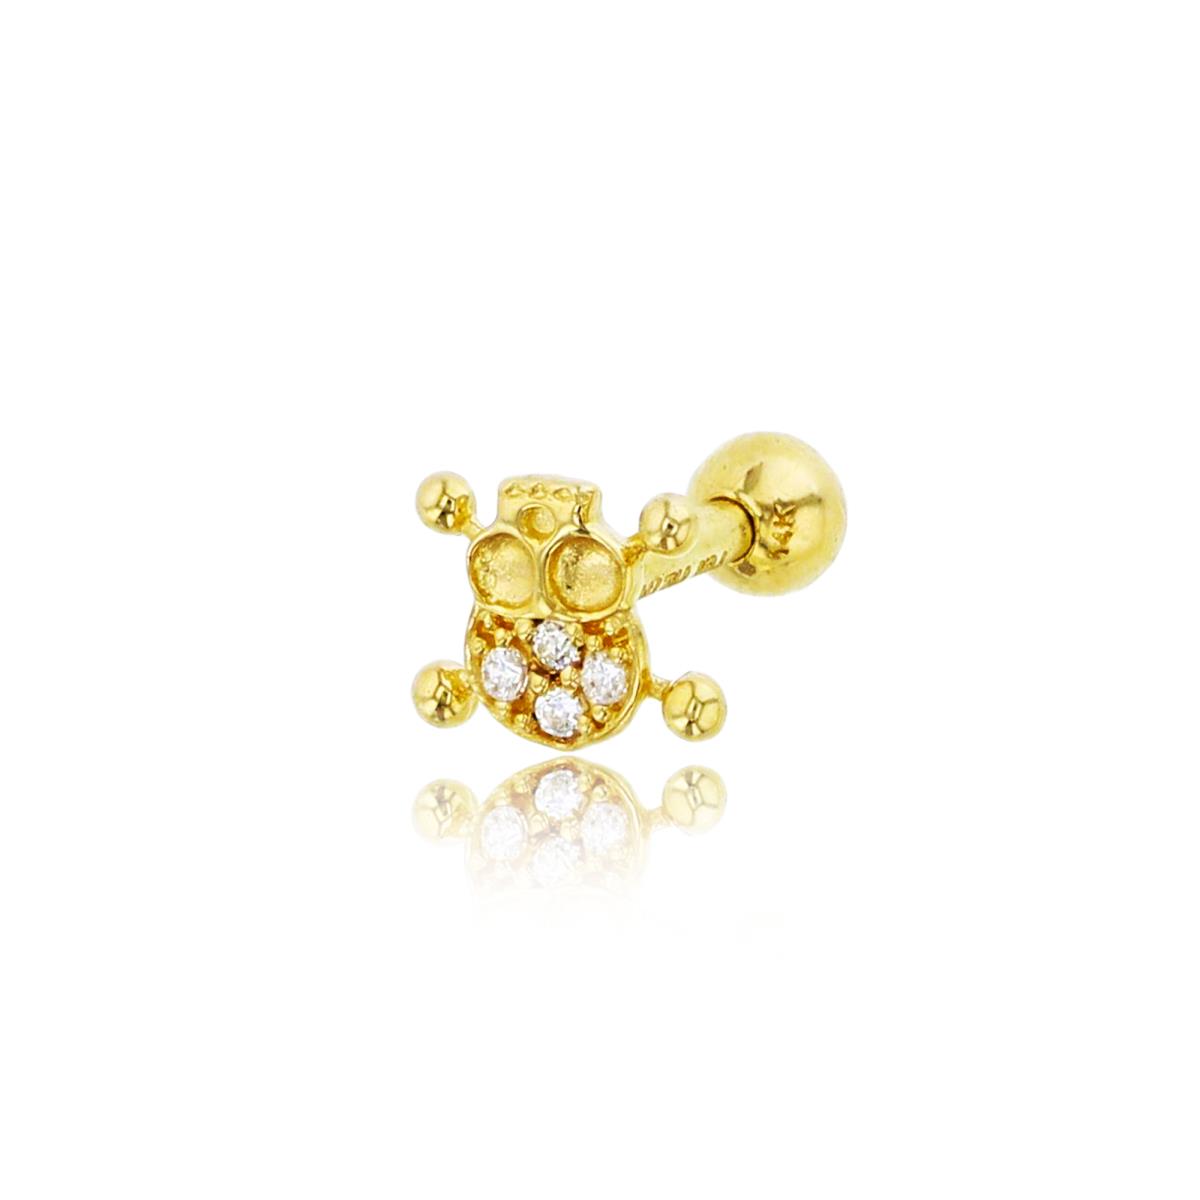 14K Yellow Gold Skull Nose Stud with Ball Screw-Back